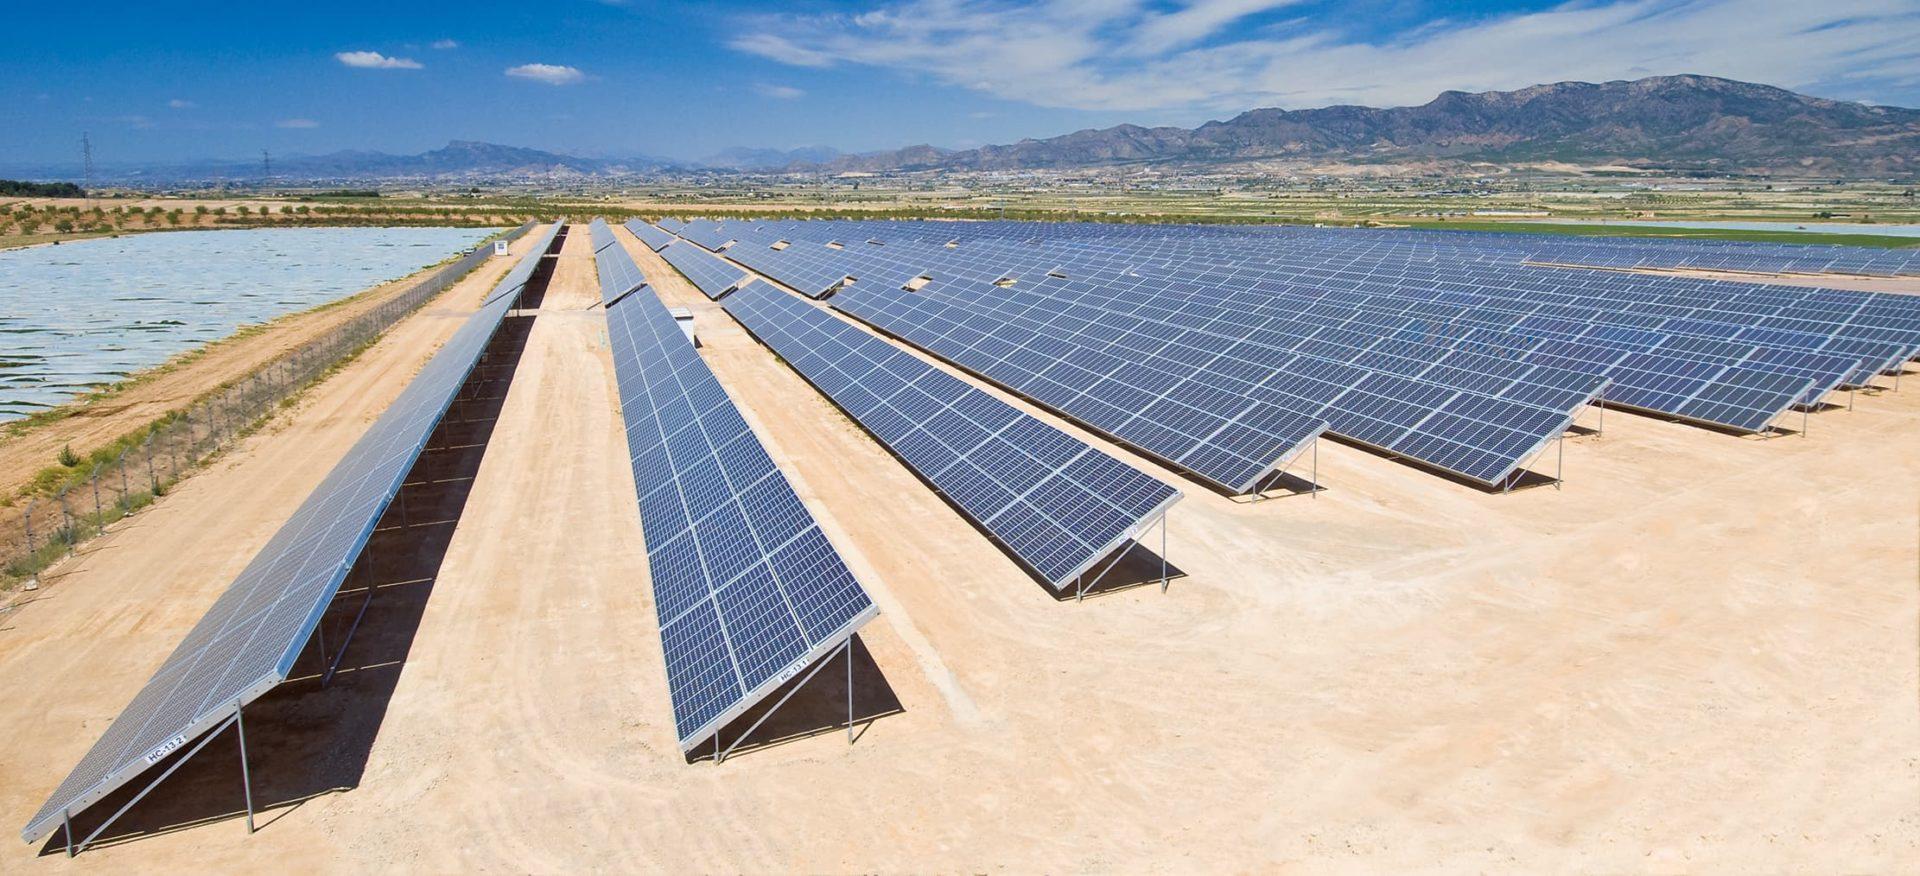 Luena with 26 MW Solar Energy Park in June